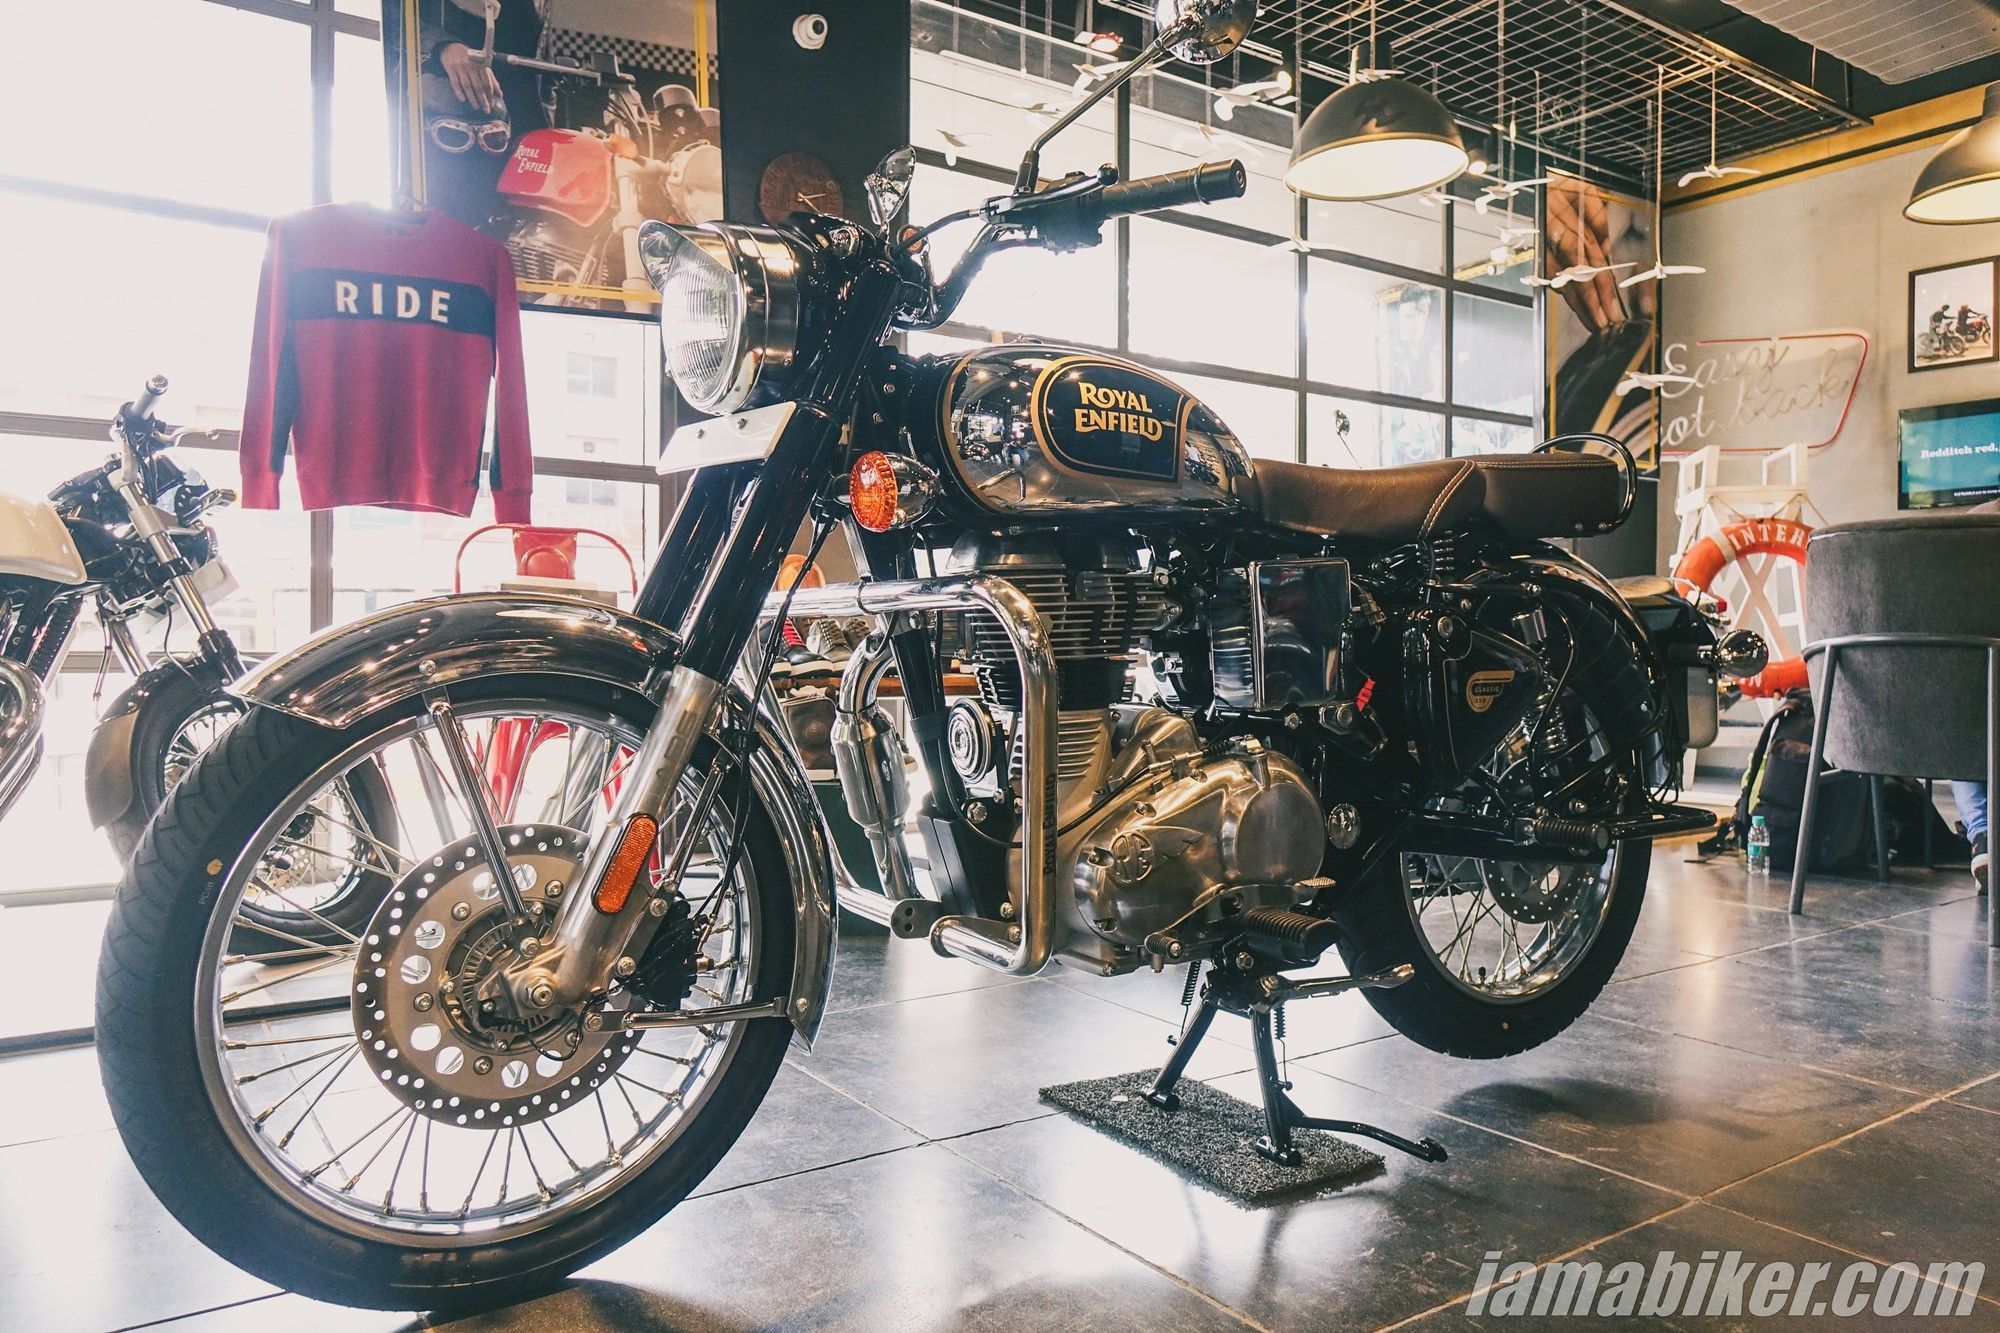 BS6 Royal Enfield Classic 350 Chrome and Stealth edition image gallery. Enfield classic, Royal enfield, Enfield